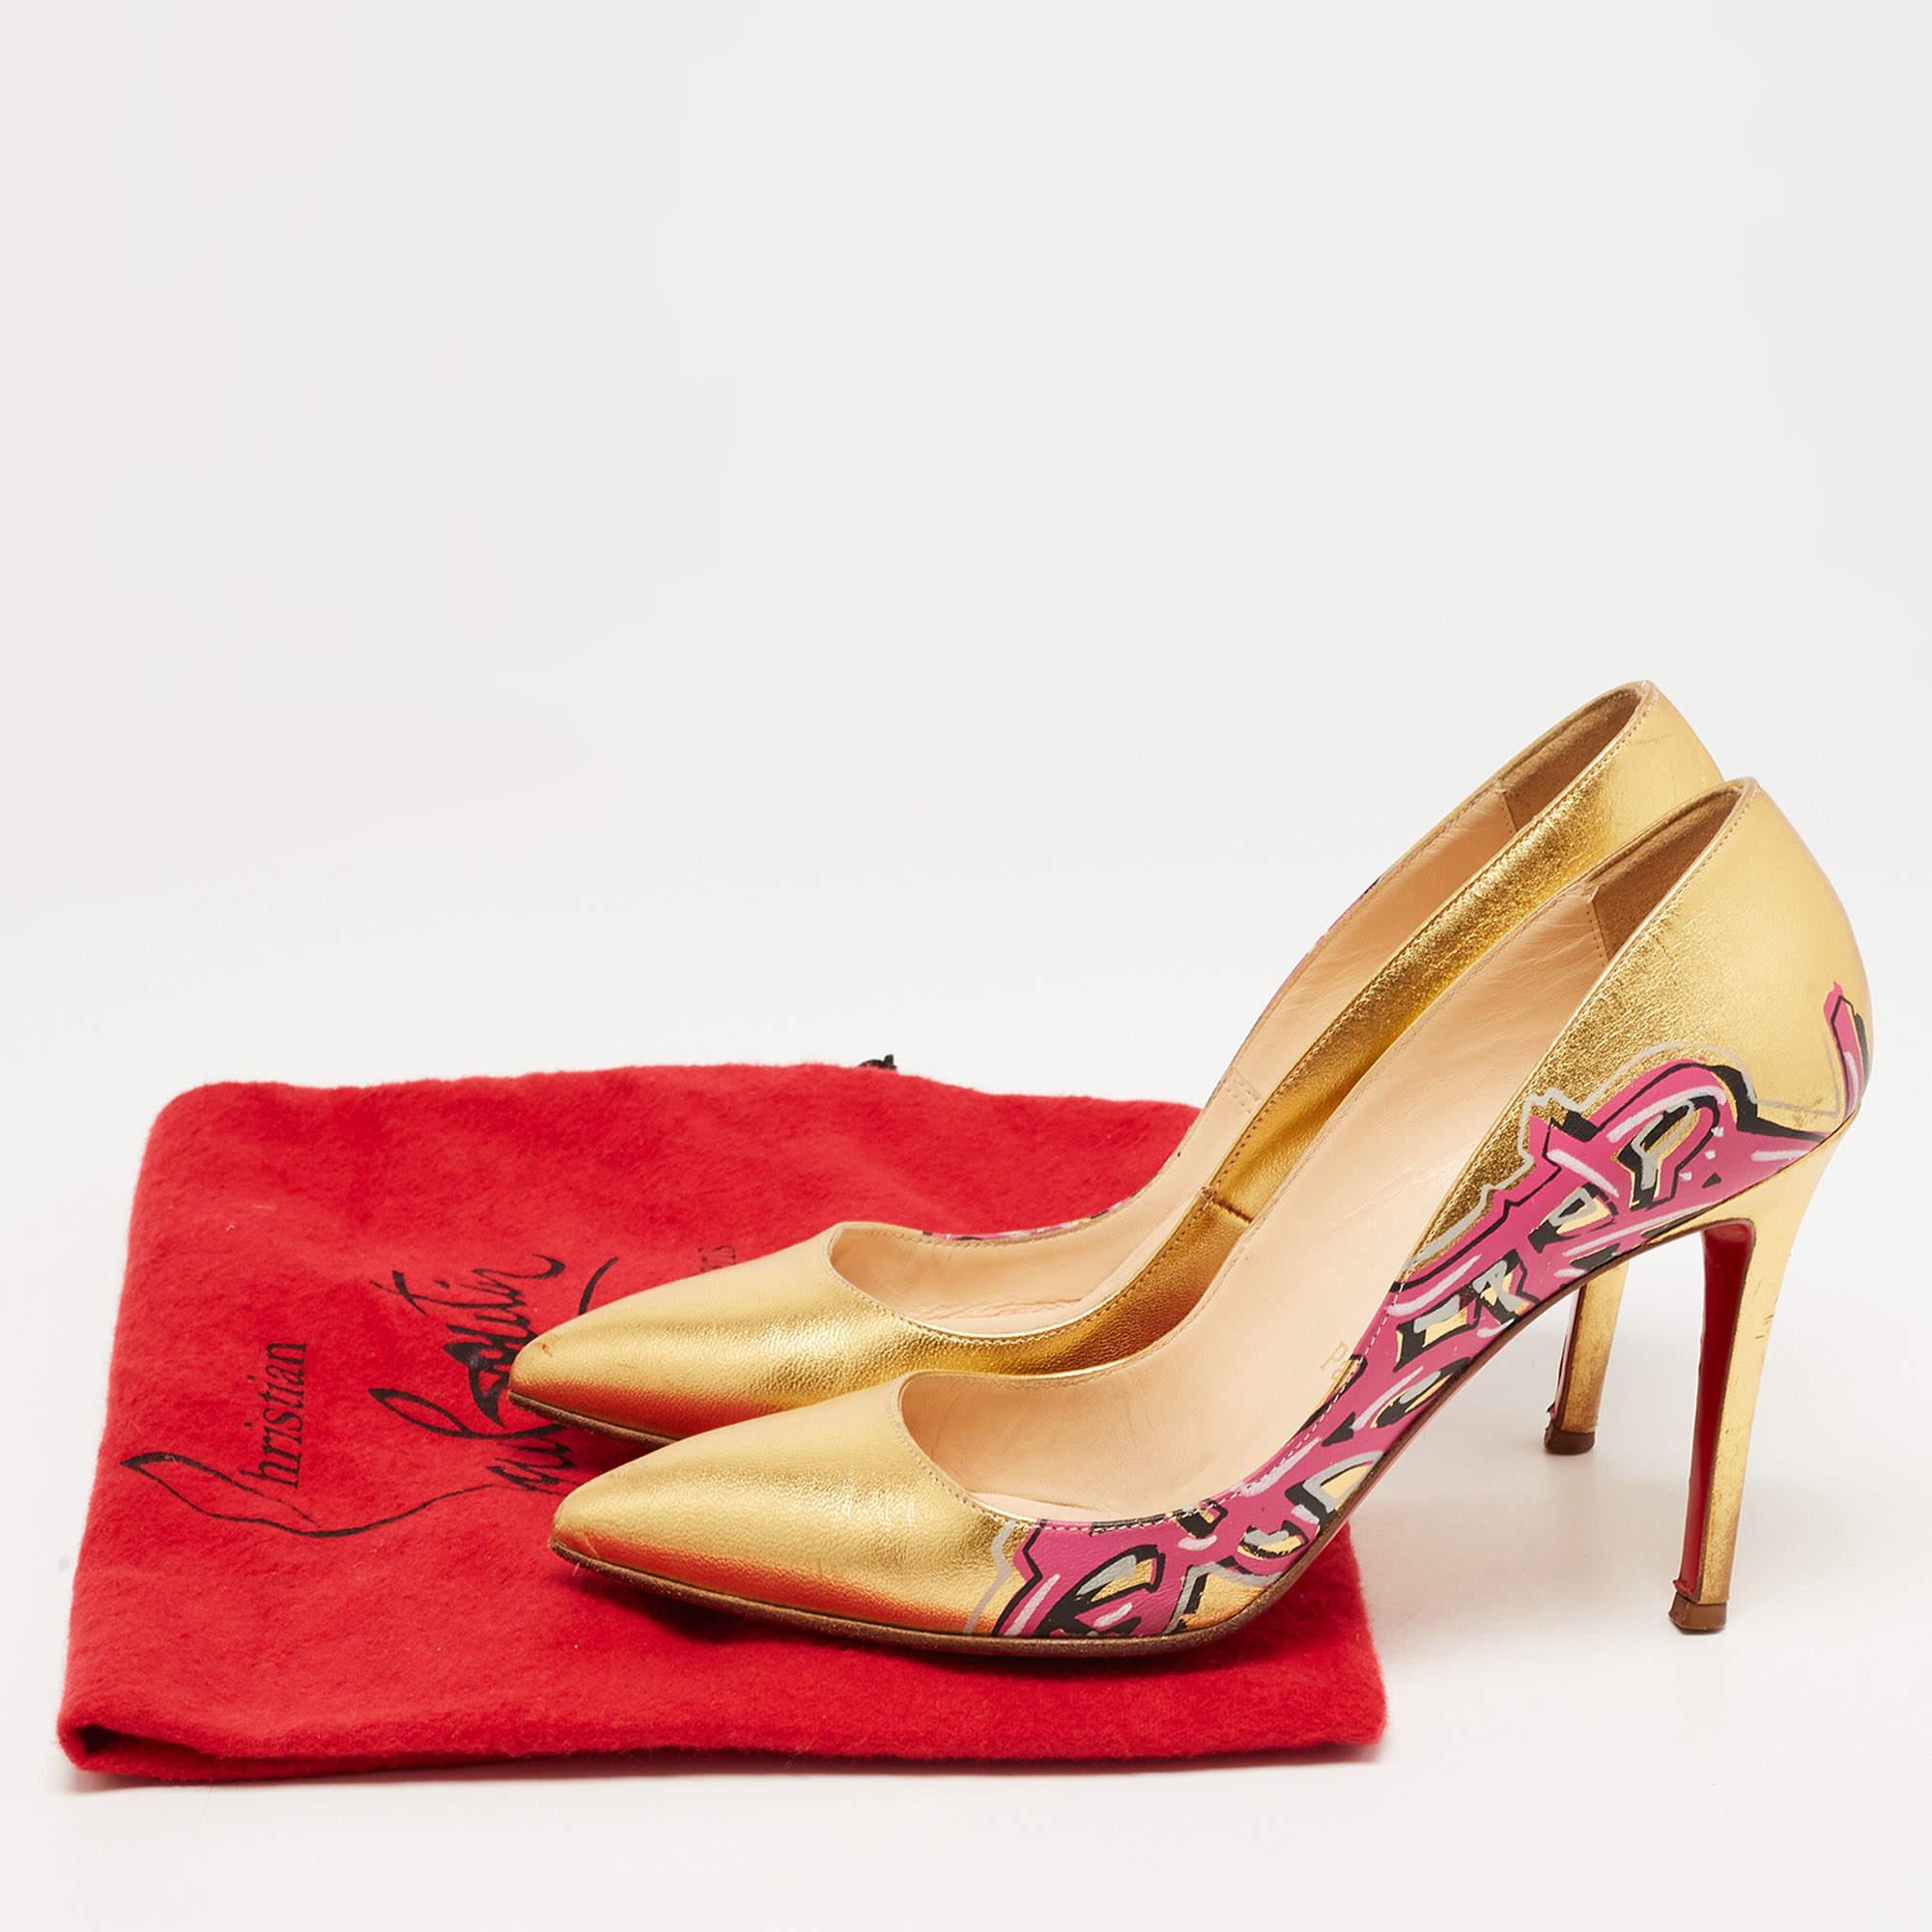 Christian Louboutin Gold Leather Pigalle Graffiti Pumps Size 37.5 For Sale 5